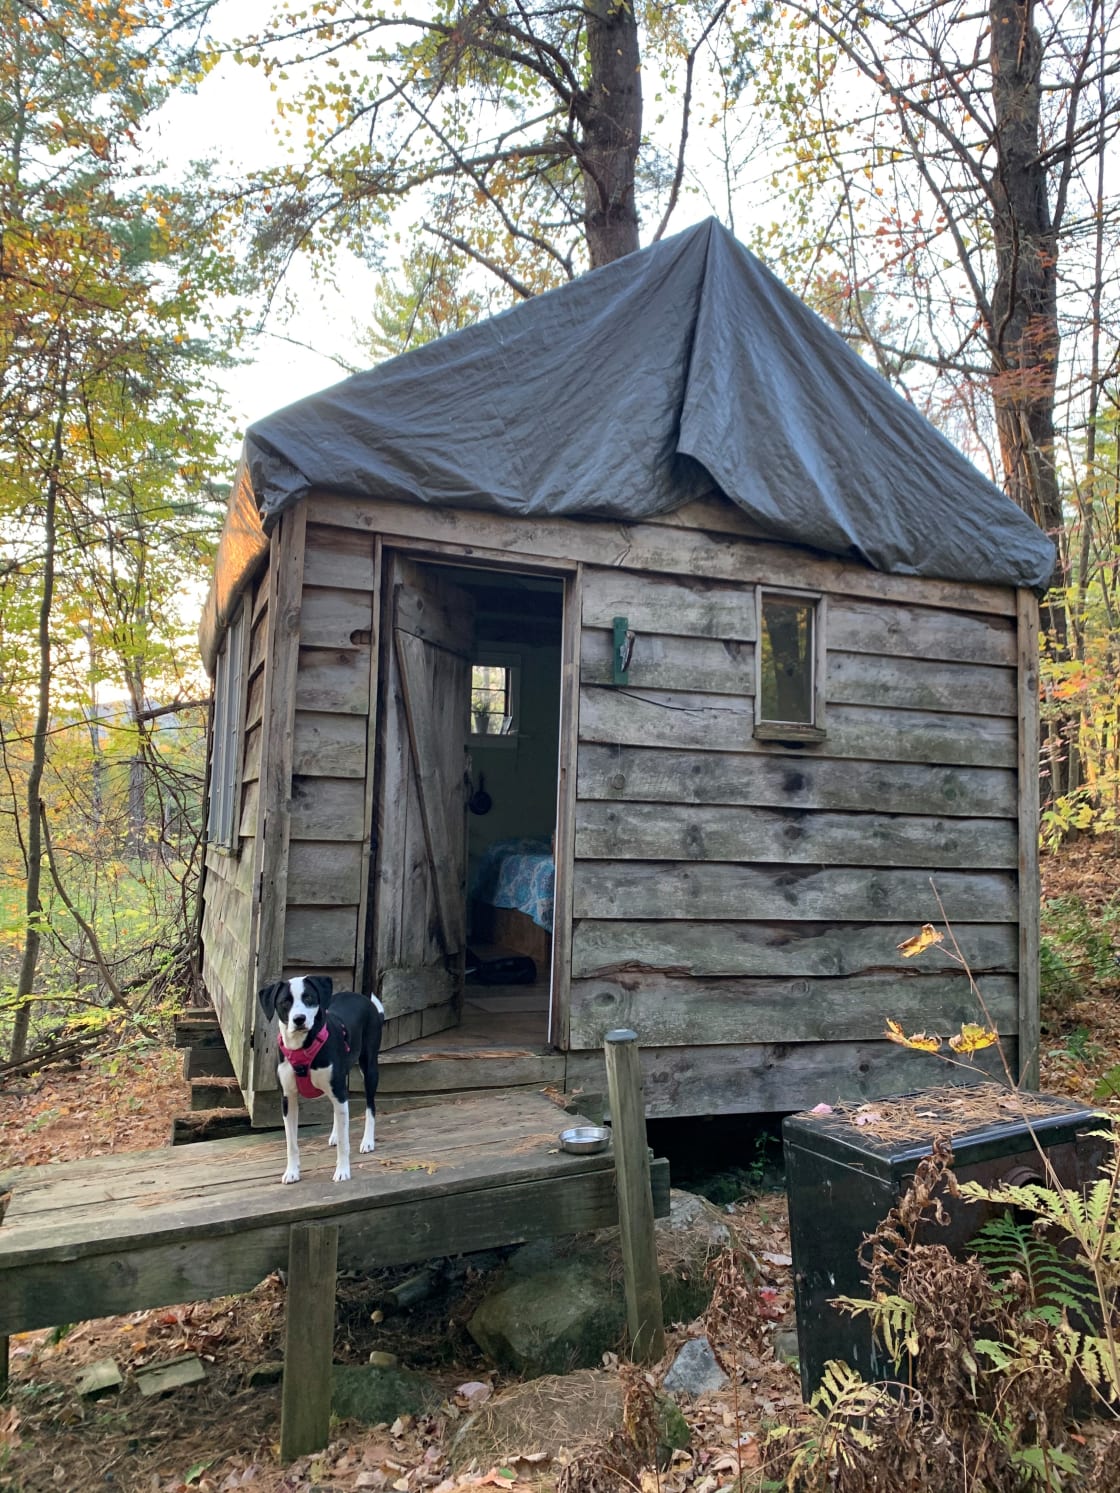 Our pup loved the cabin as much as we did.